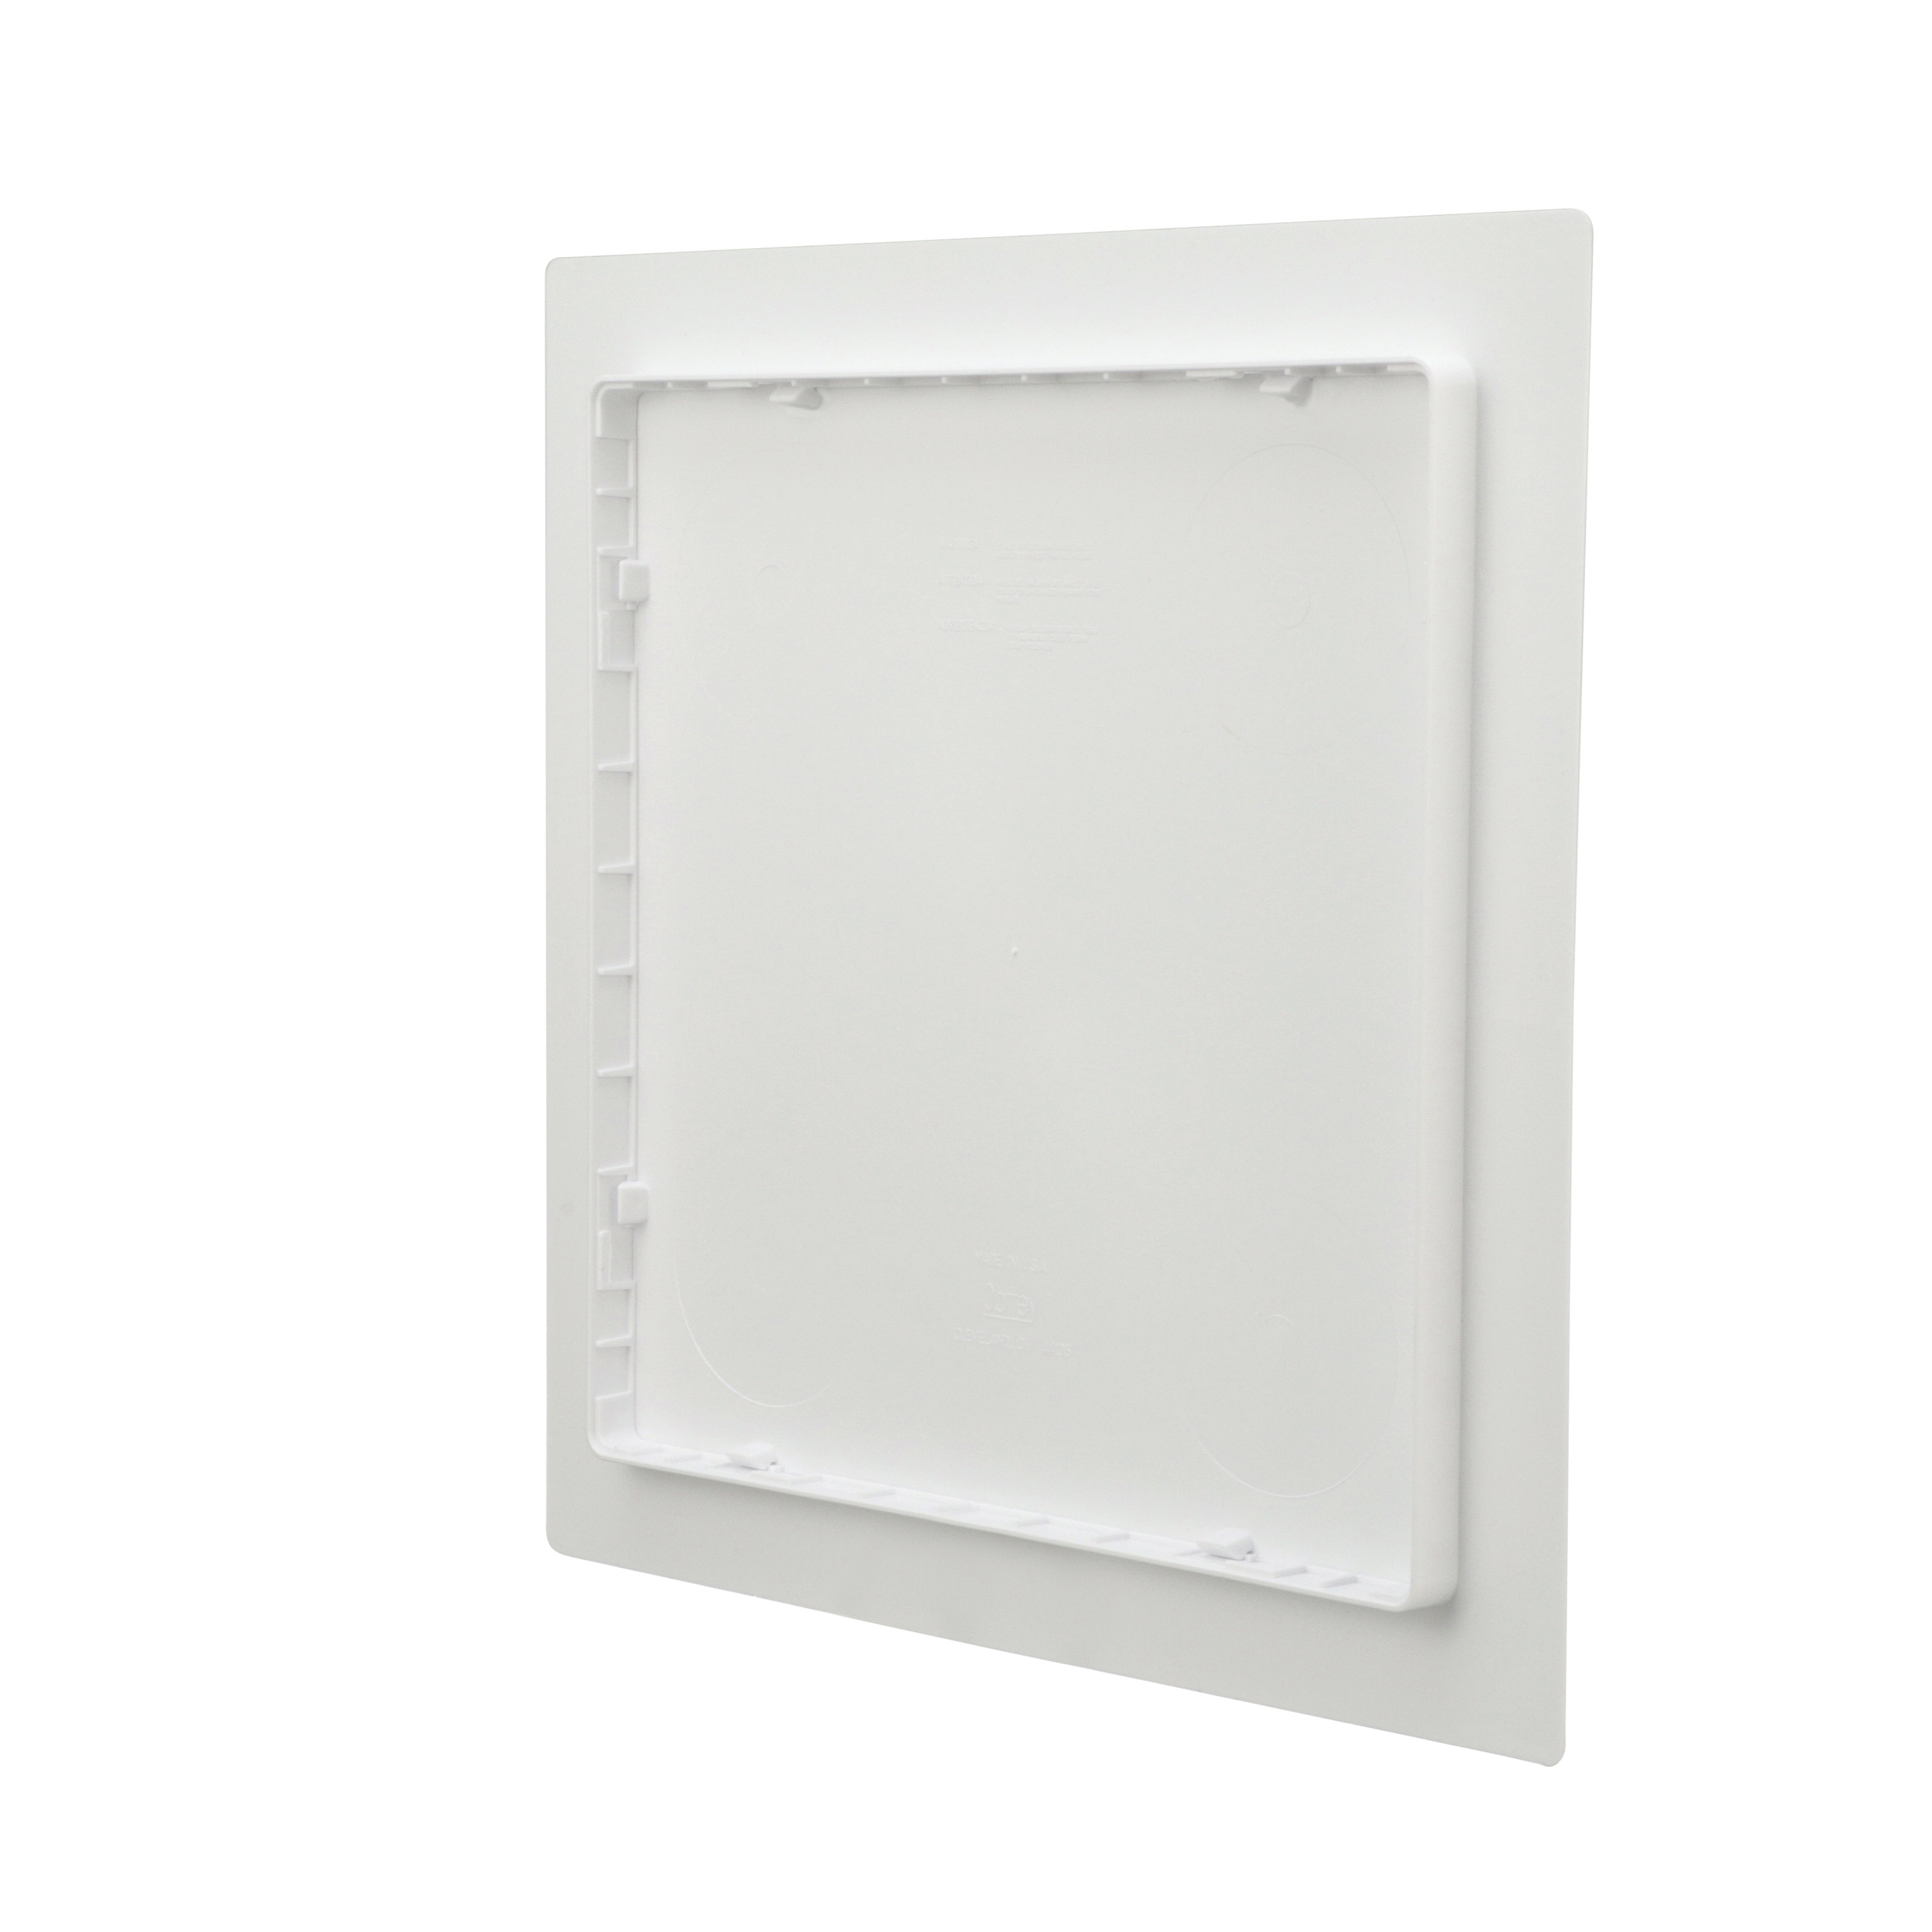 8-5/8 x 11-3/4 Plastic Wall Access Panel Ceilings Plumbing Switches Ventilation 